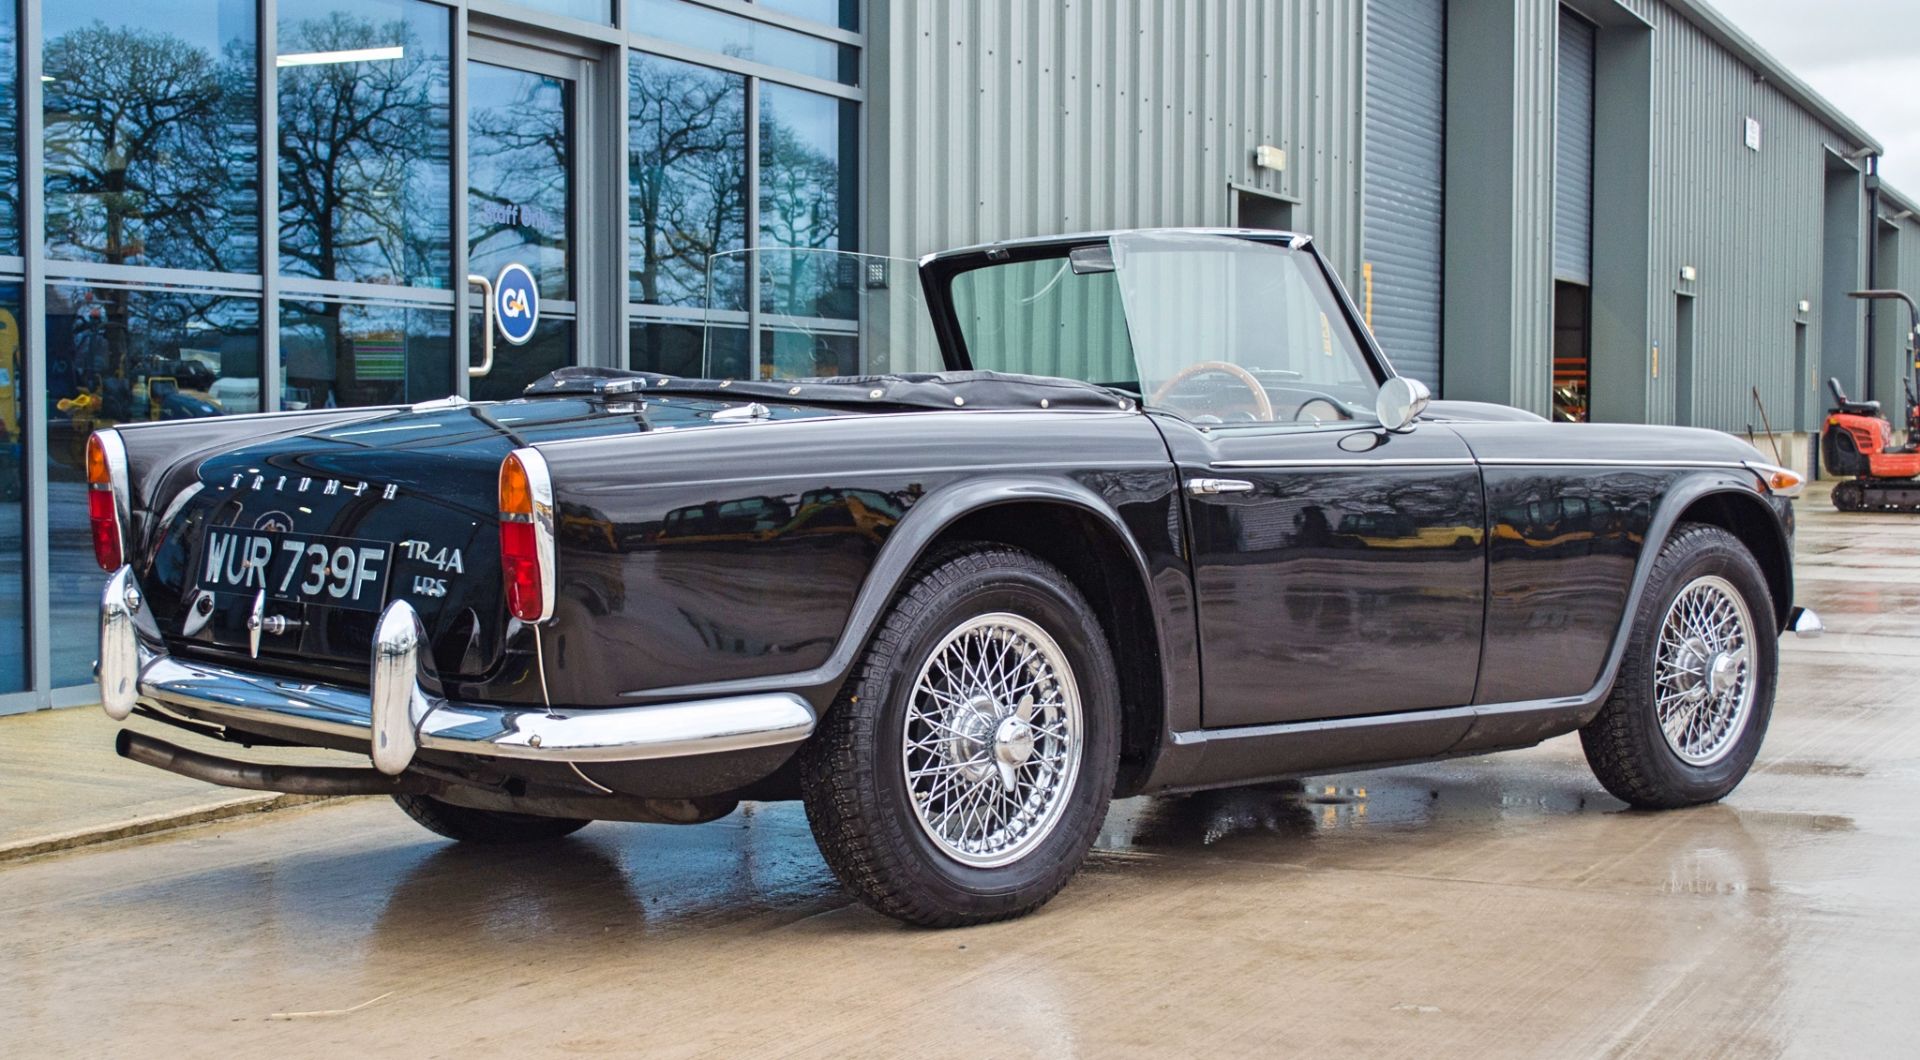 1967 Triumph TR4A IRS 2135cc convertible - Image 5 of 56